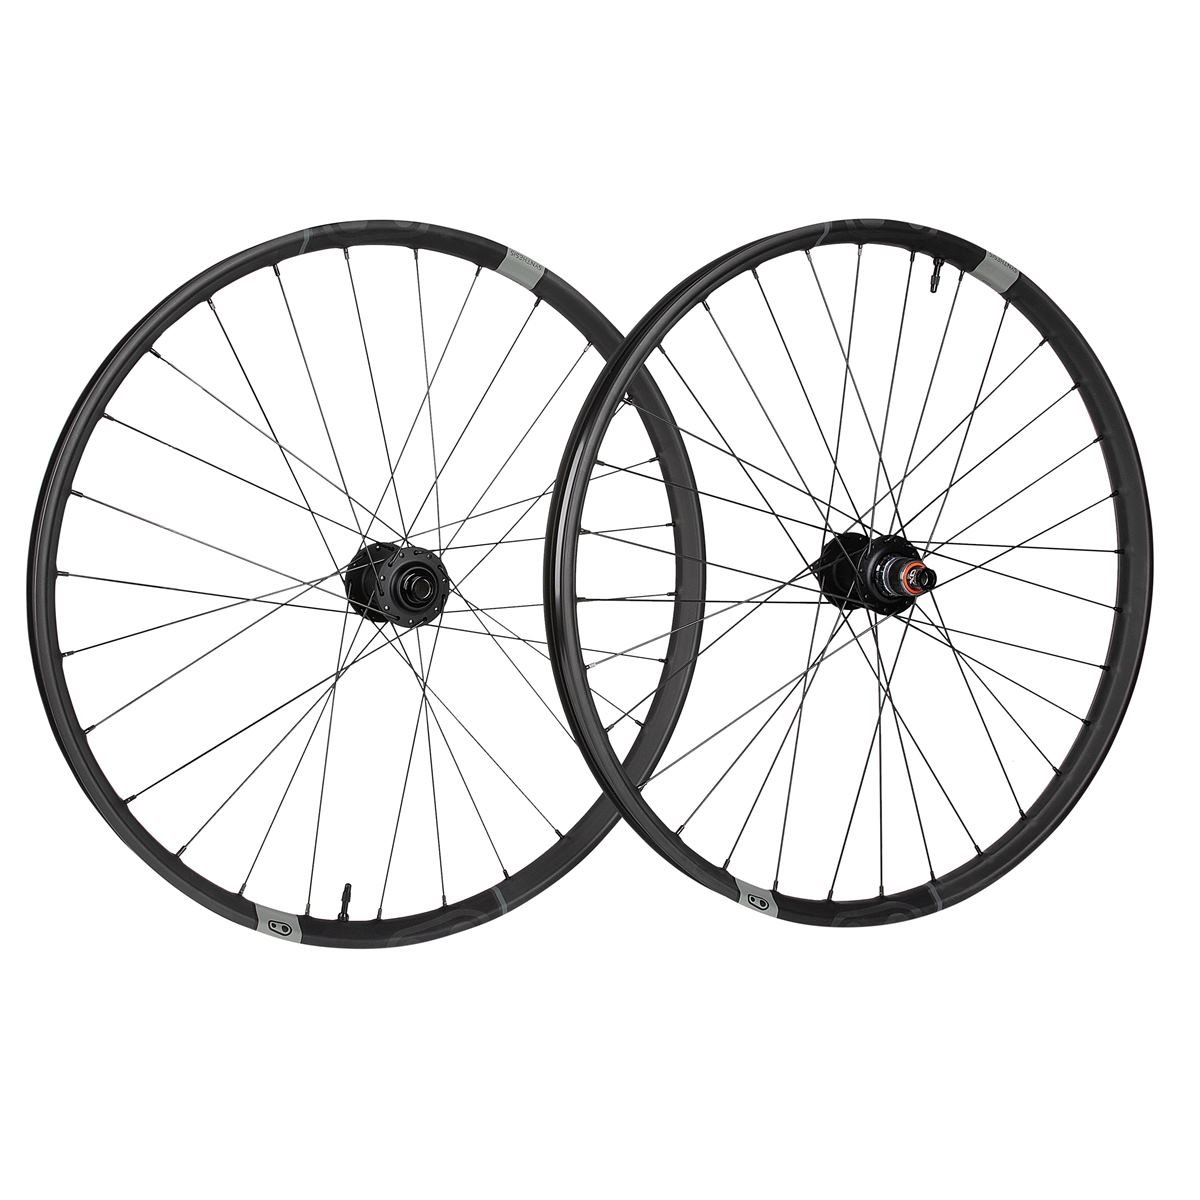 Crankbrothers Wheel Set Synthesis Carbon E-Bike 27.5 Inch, 15x110 mm/12x148 mm (Boost), SRAM XD, Tubeless Ready